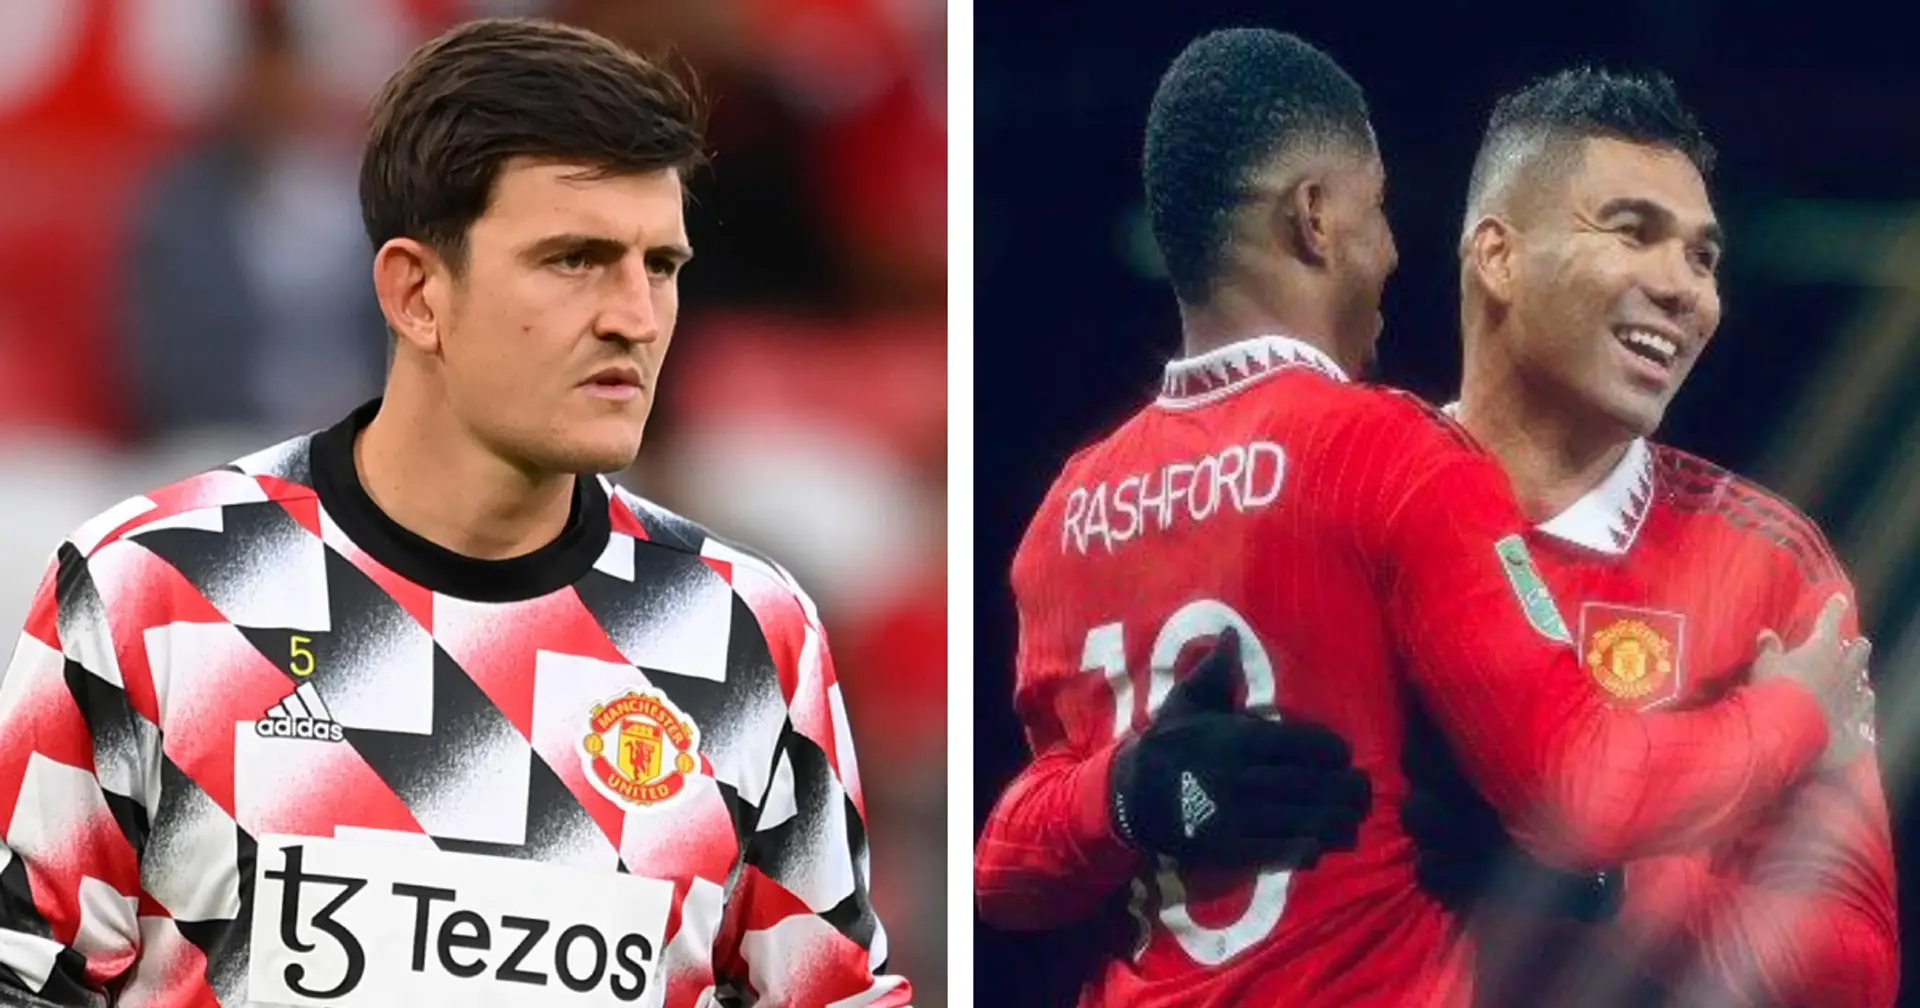 Why was Harry Maguire missing vs Burnley? Explained